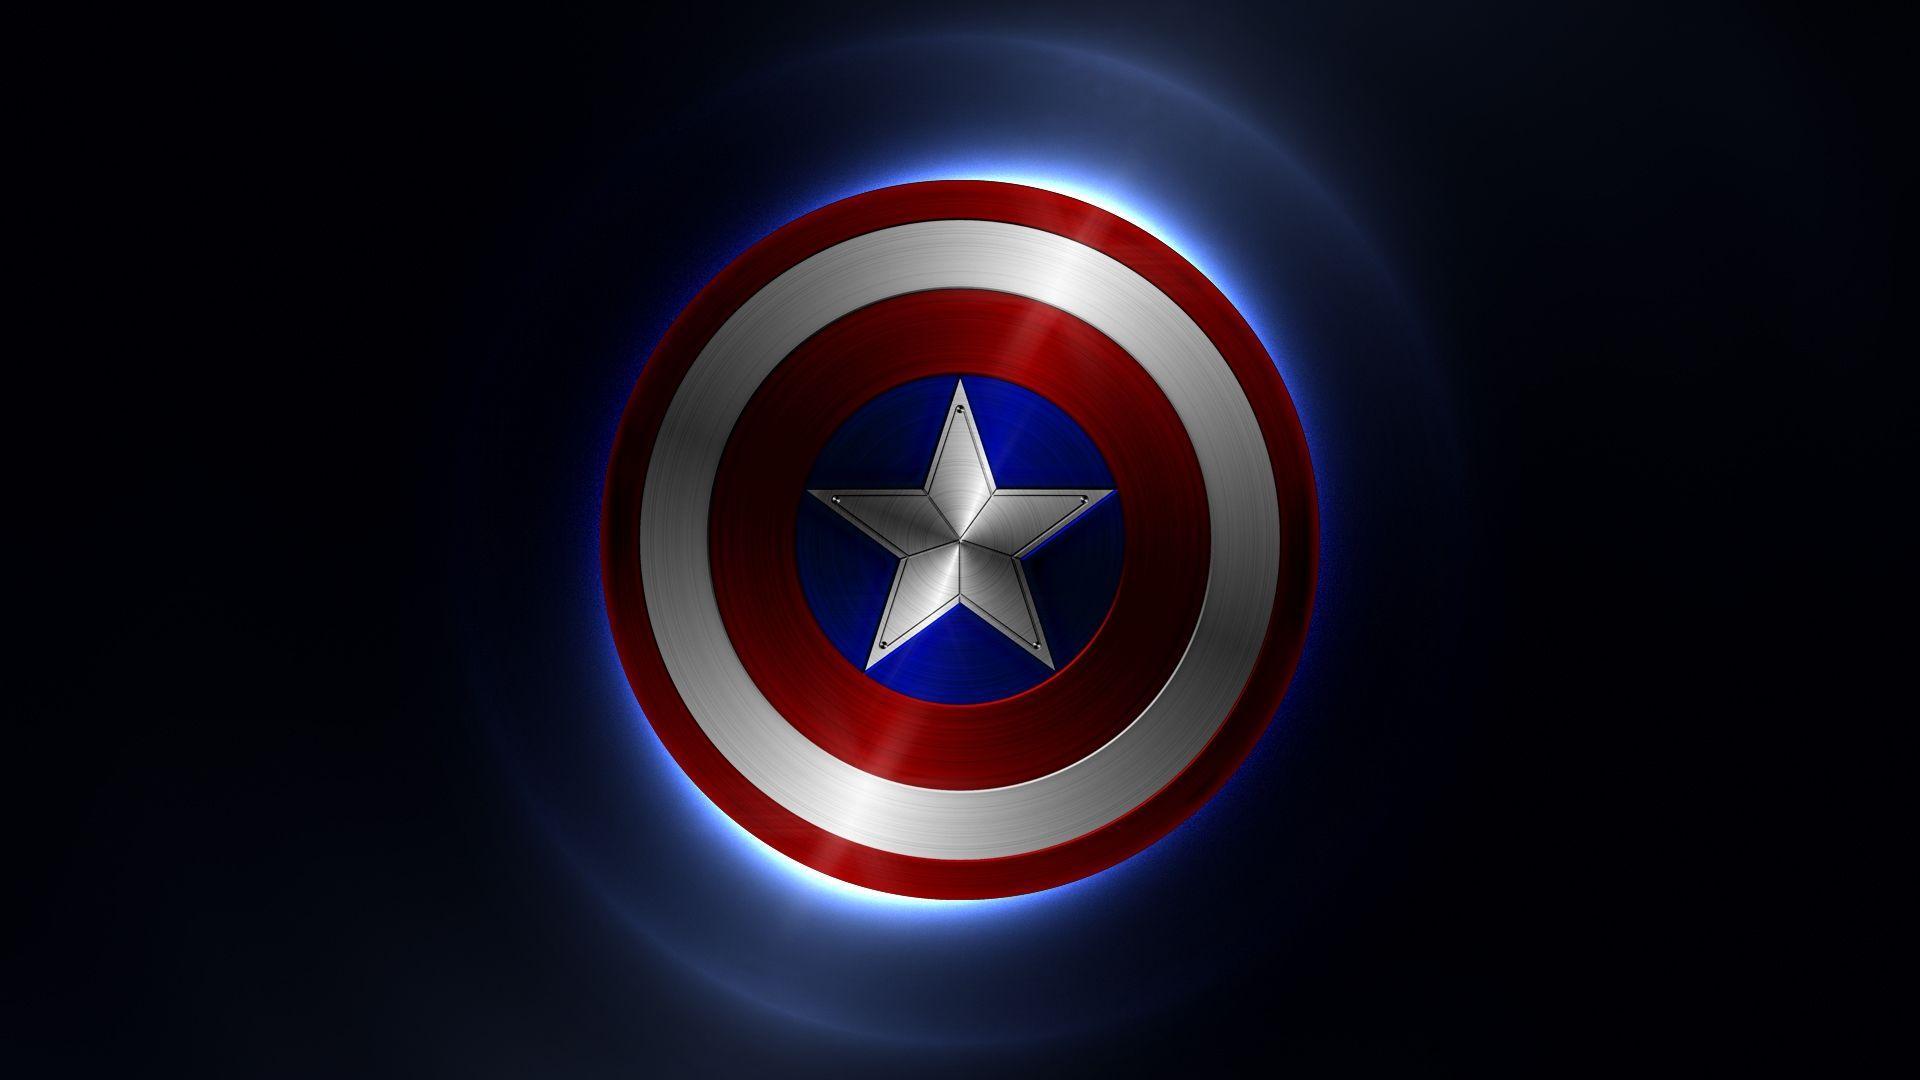 Captain America Shield Wallpapers Top Free Captain America Shield Backgrounds Wallpaperaccess